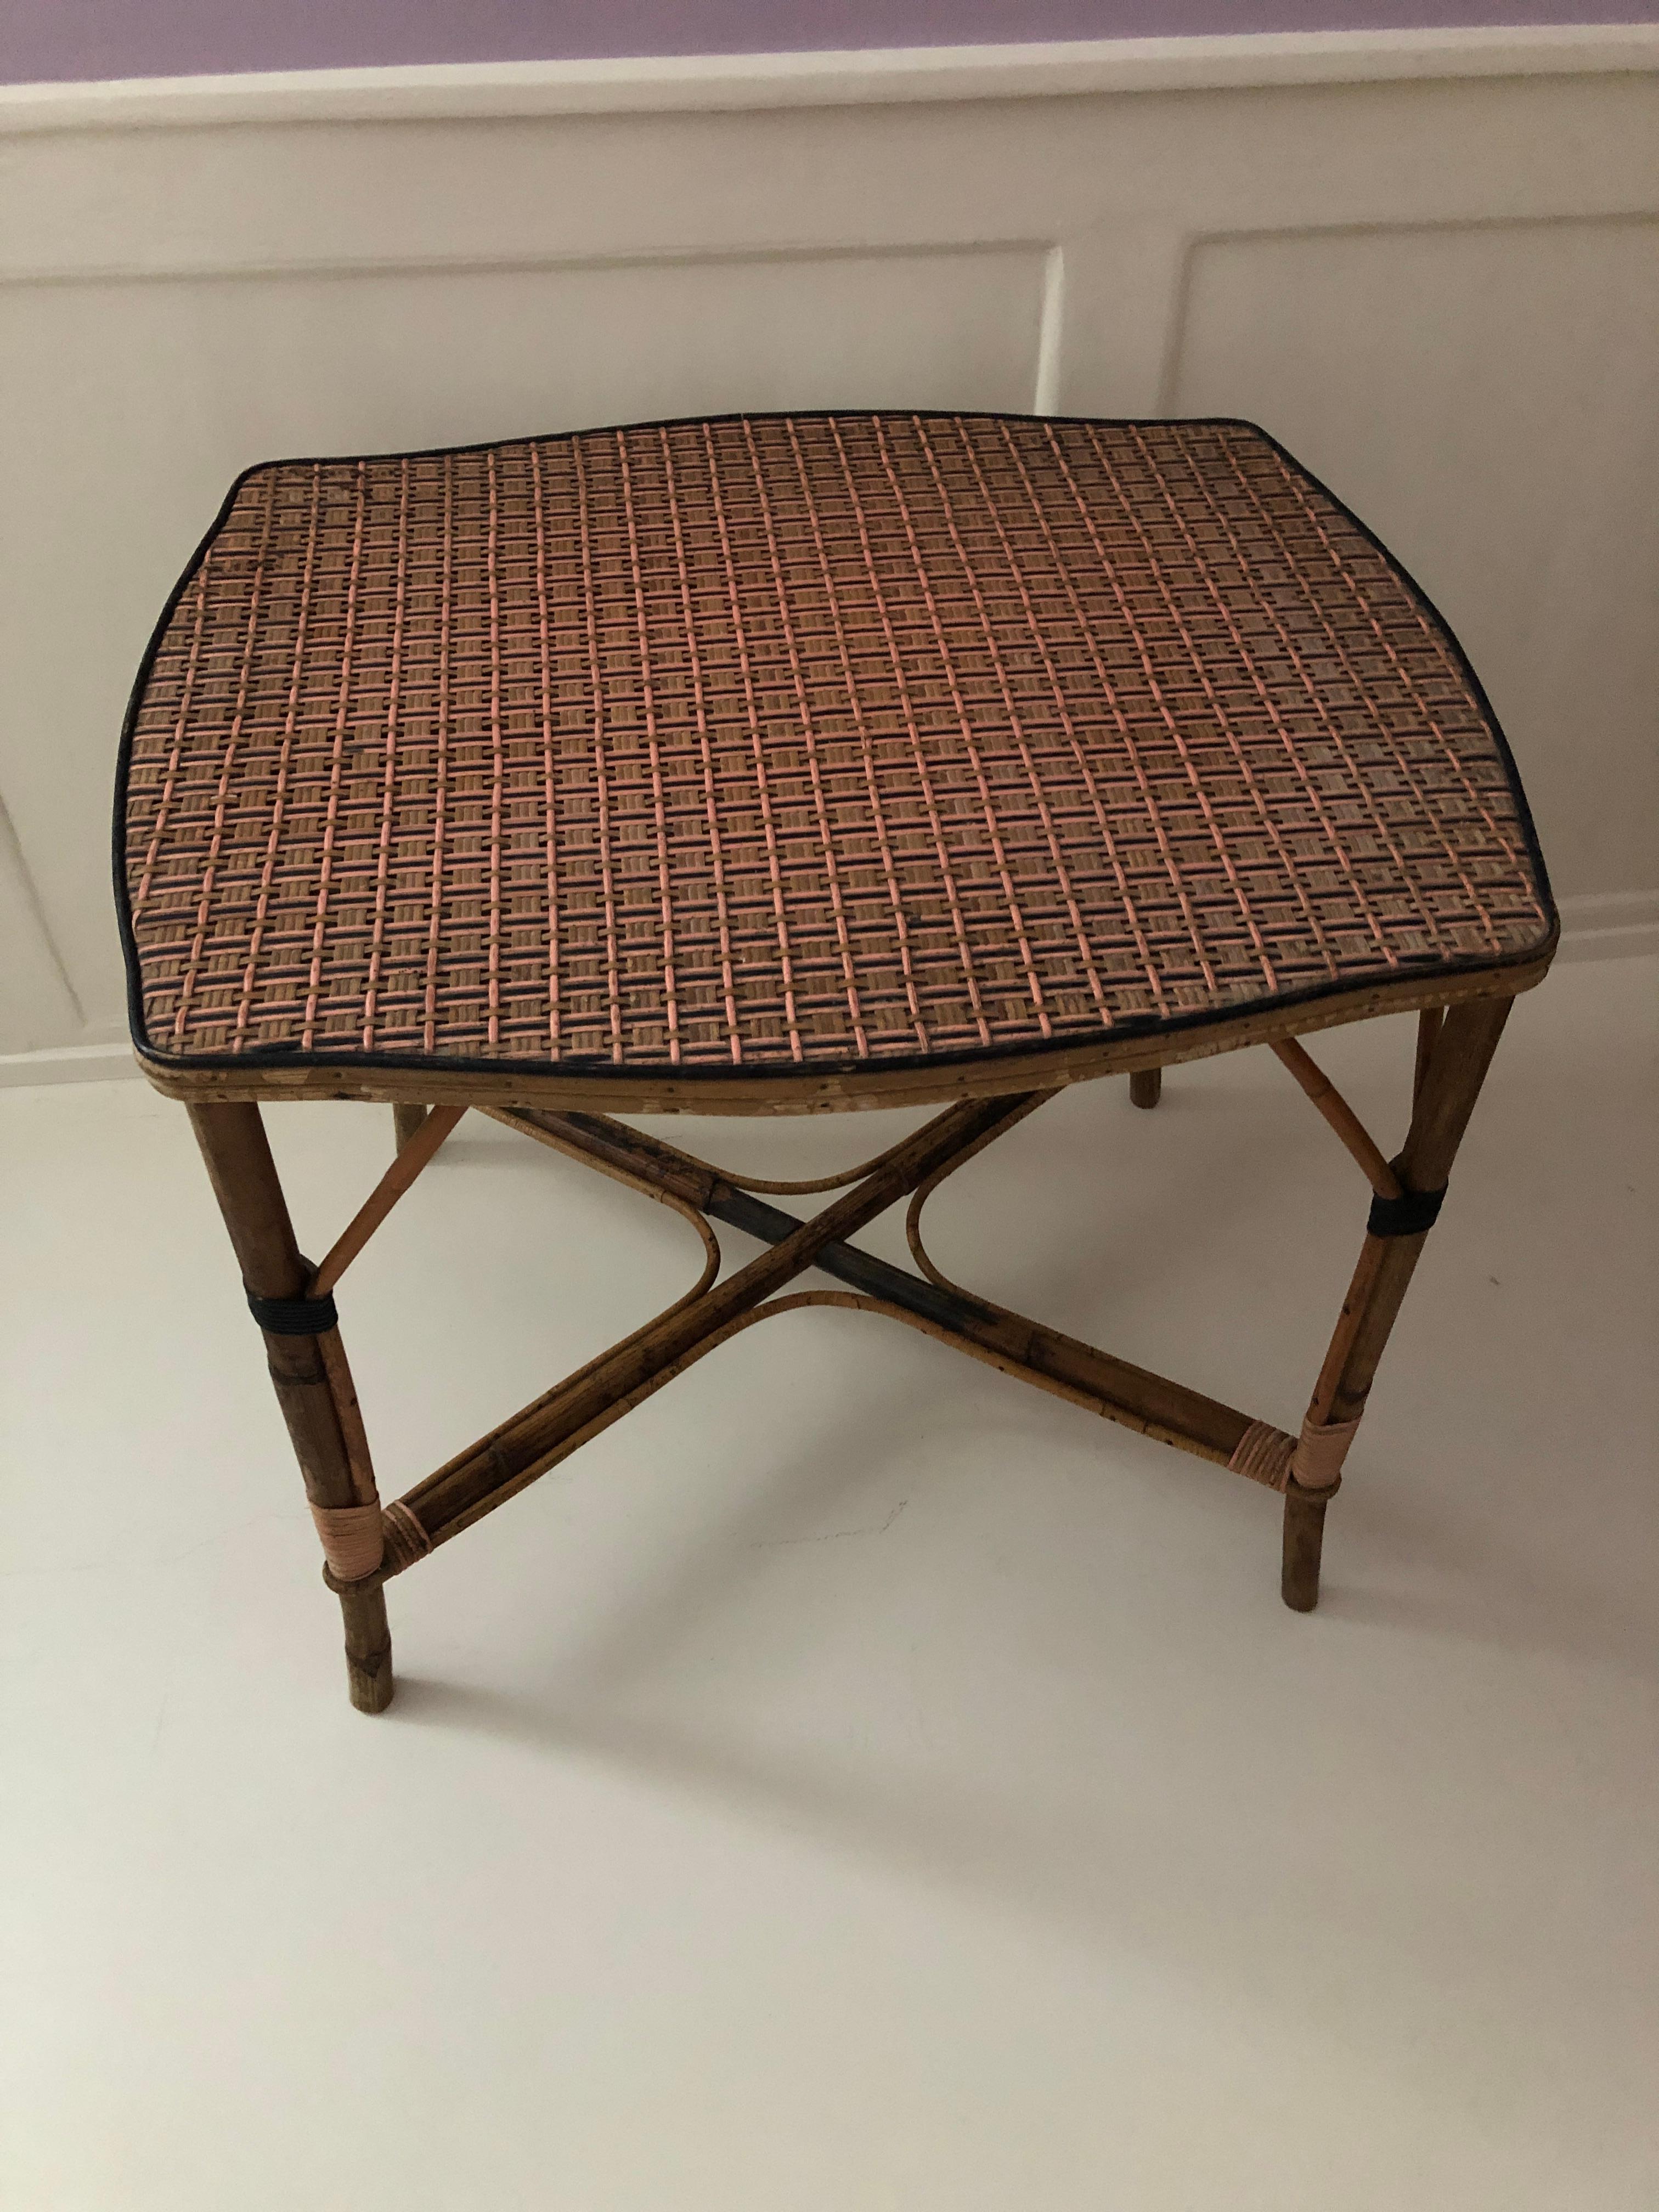 Hand-Woven Vintage Rattan Intimate Tea Table with Pink Woven Details, France 1920s